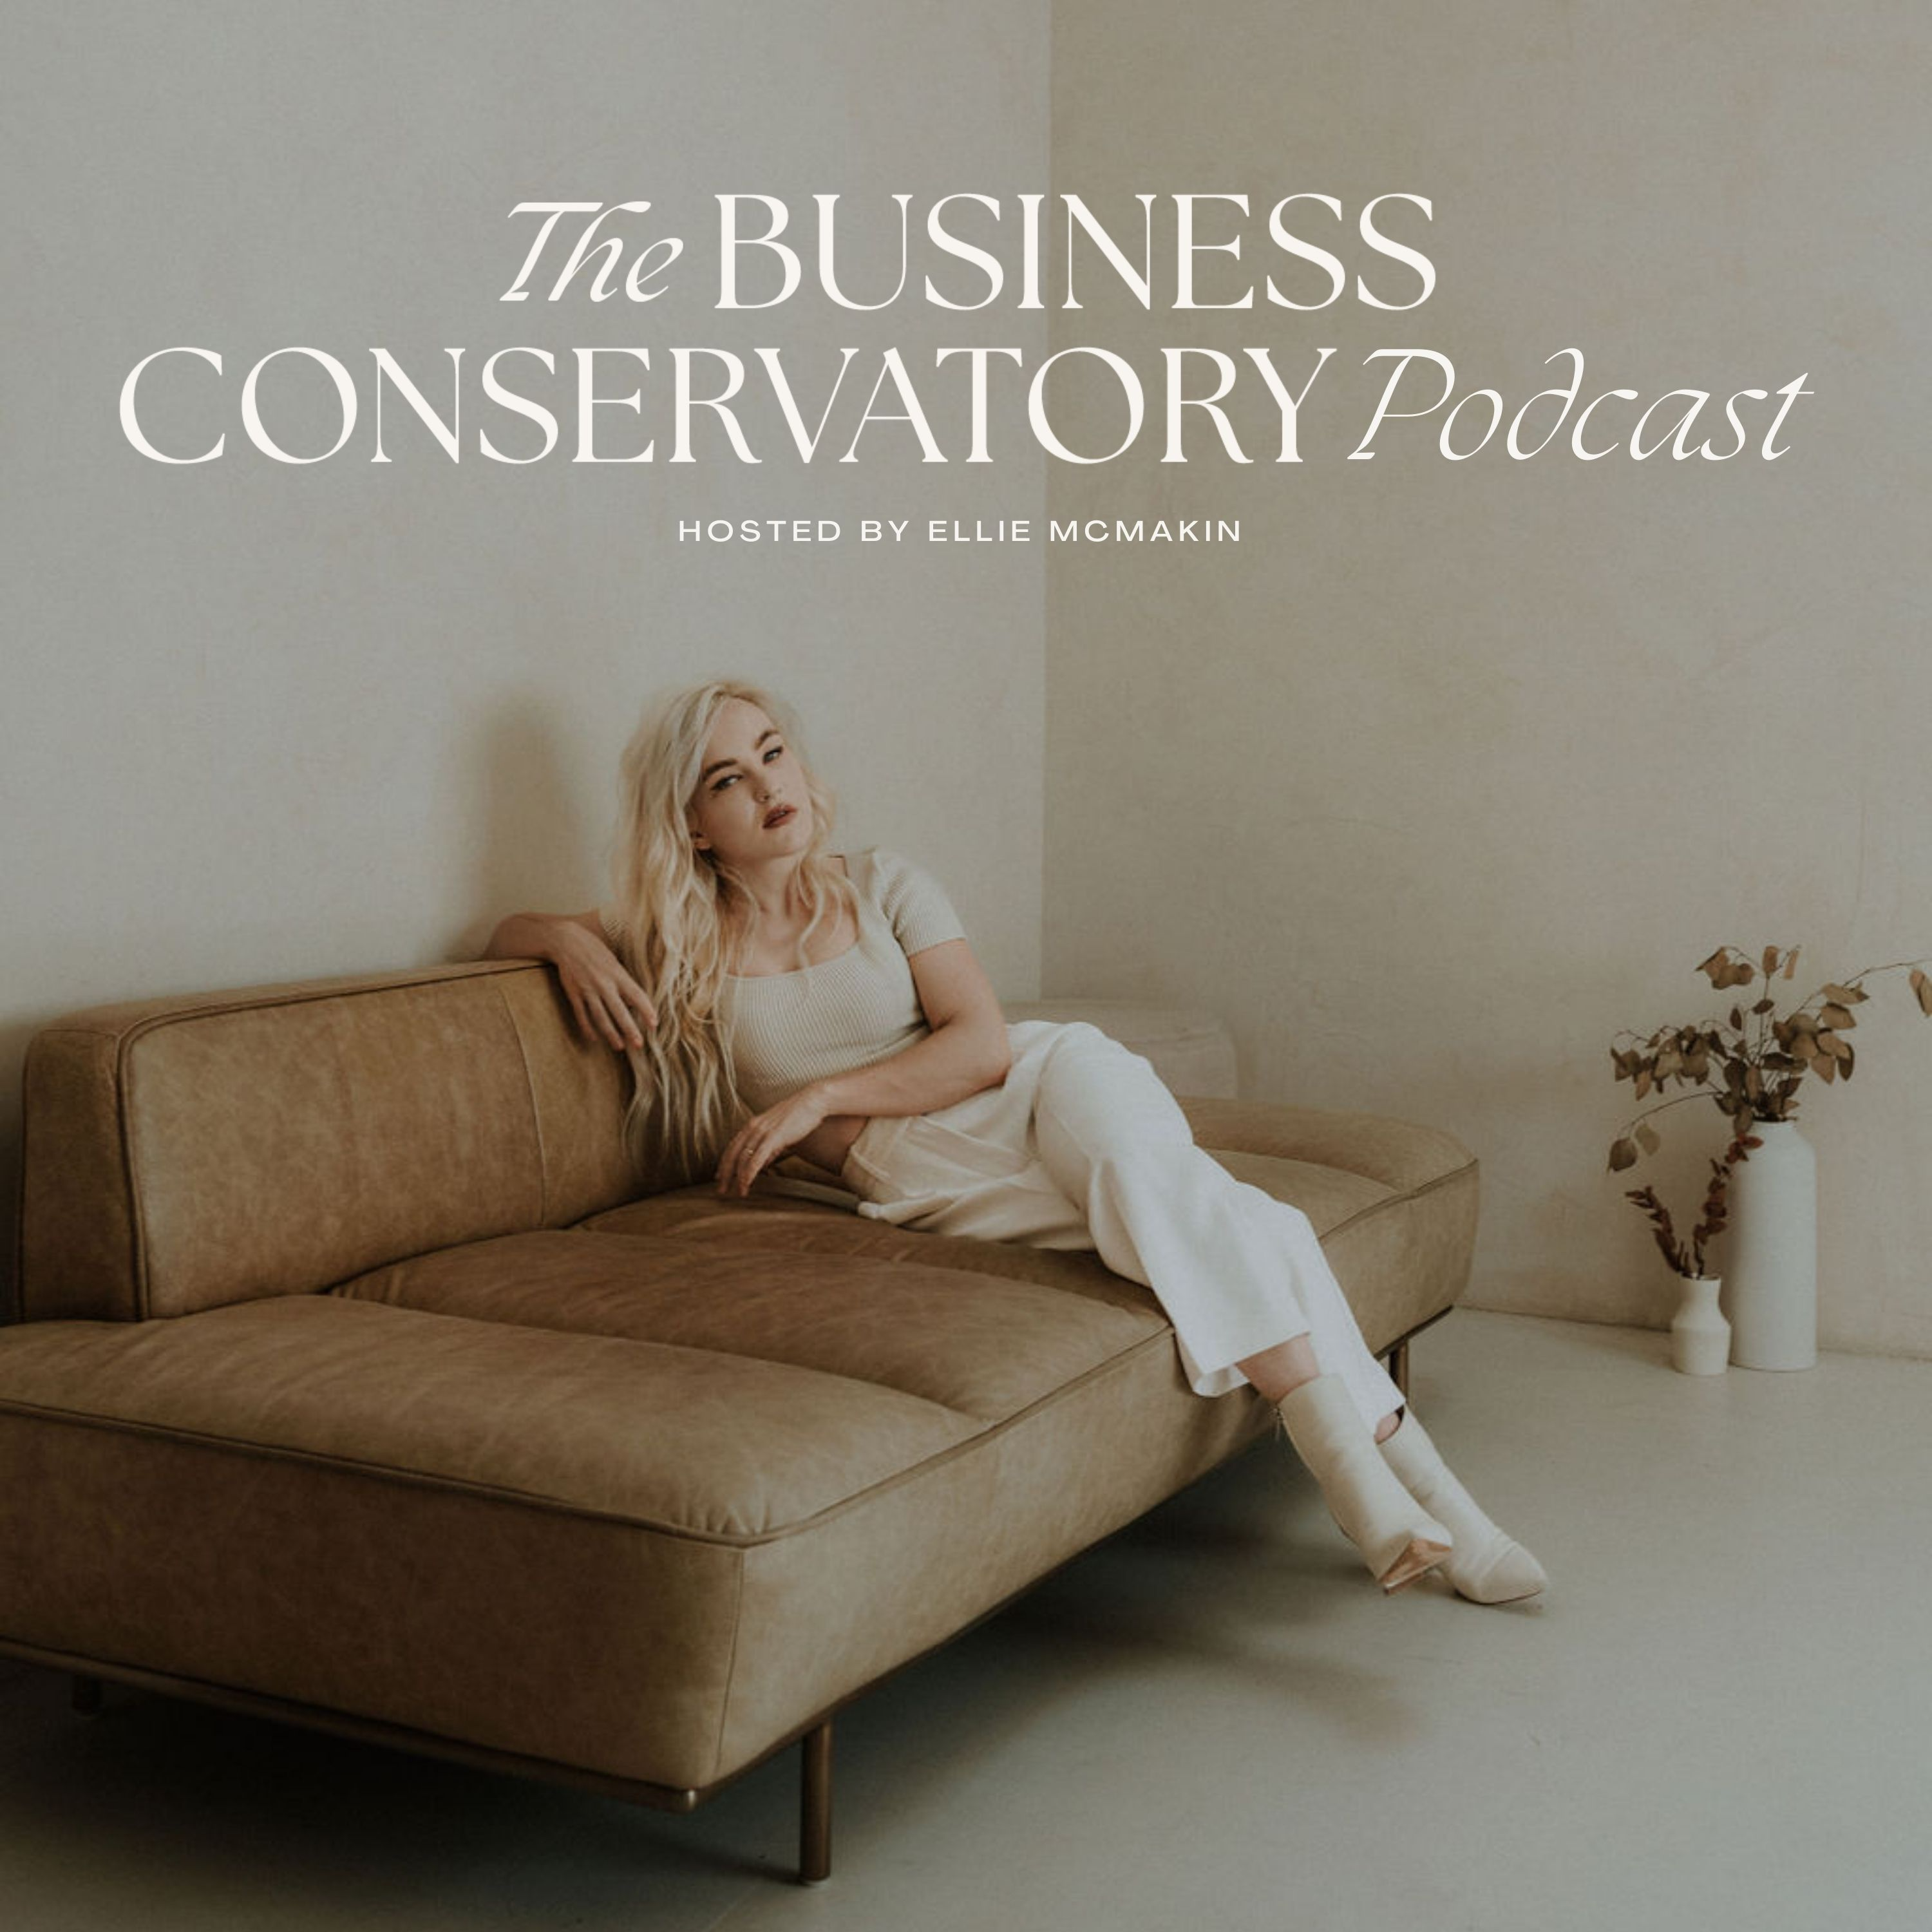 The Business Conservatory Podcast